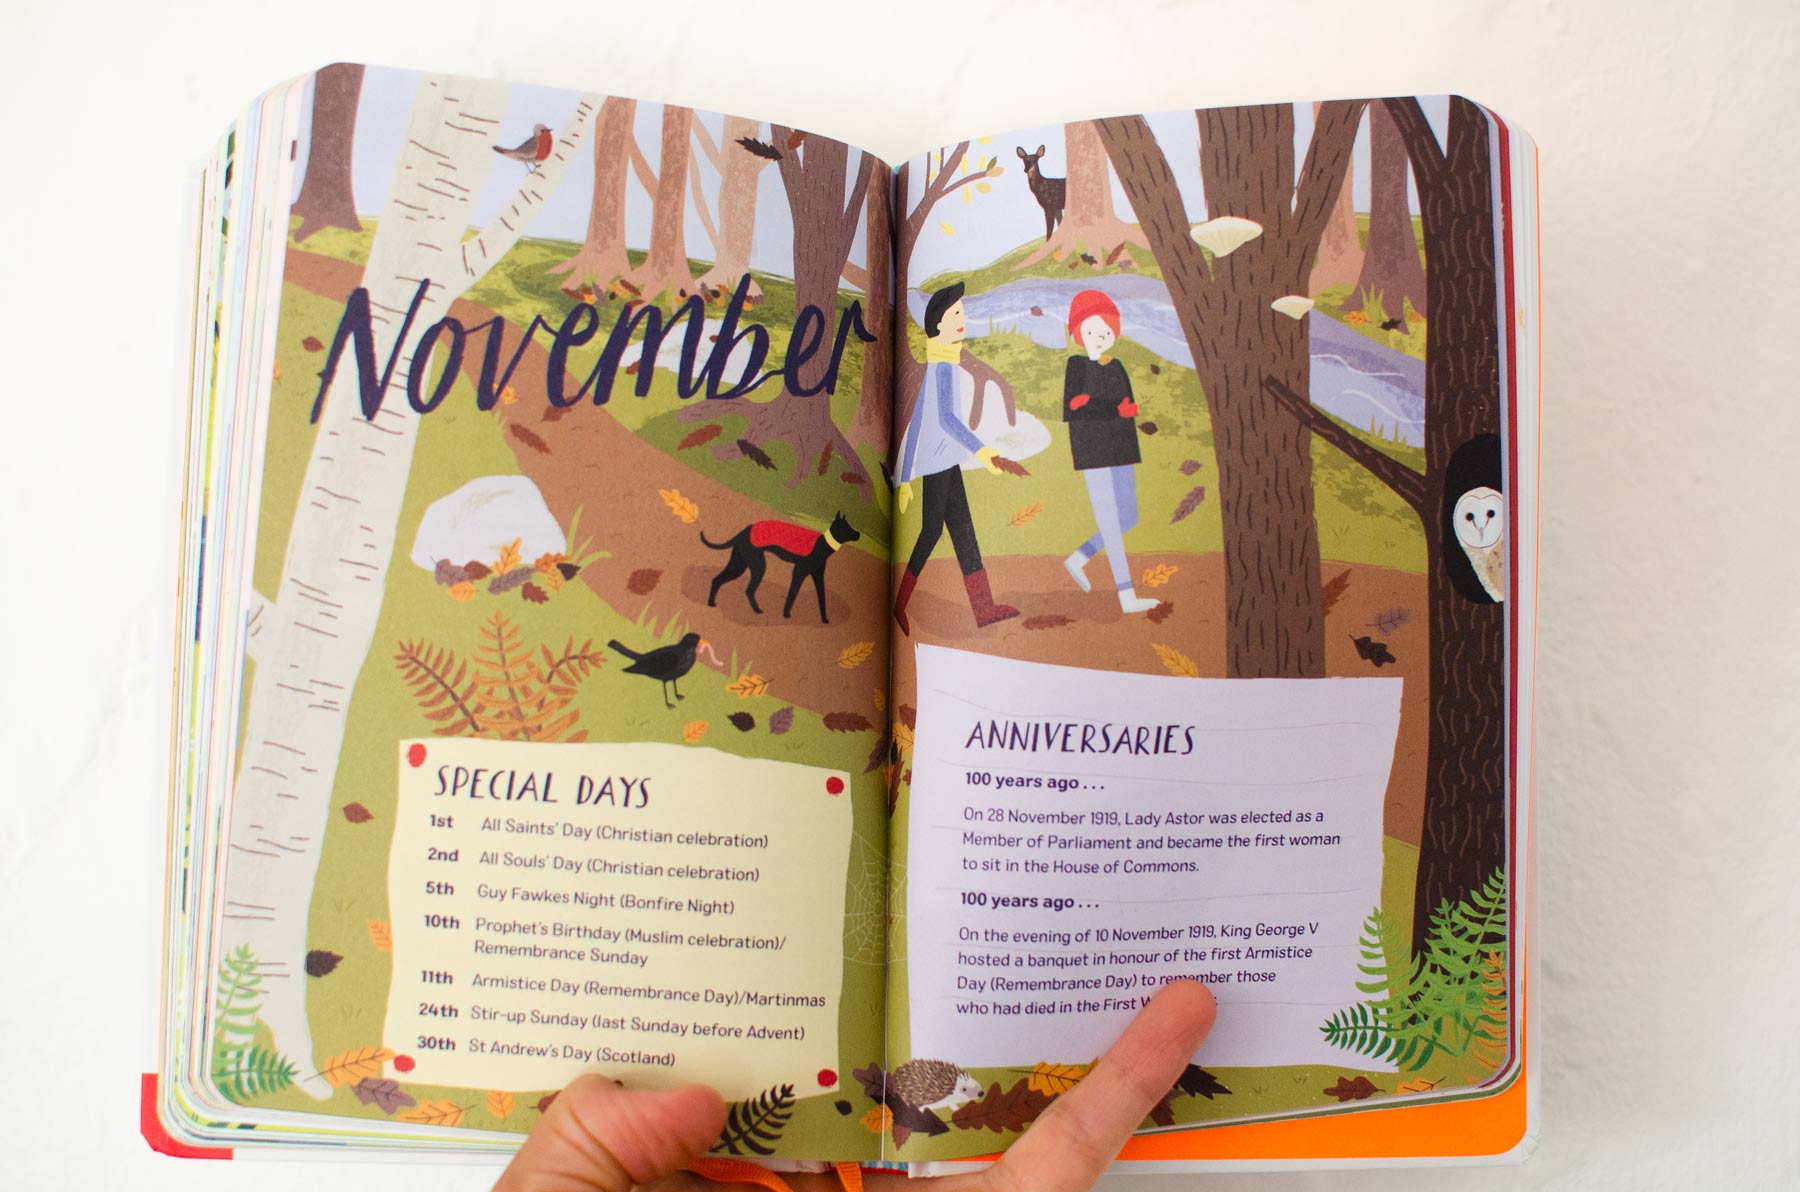 A double page spread for 2019: Nature Month by Month illustrated by Elly Jahnz